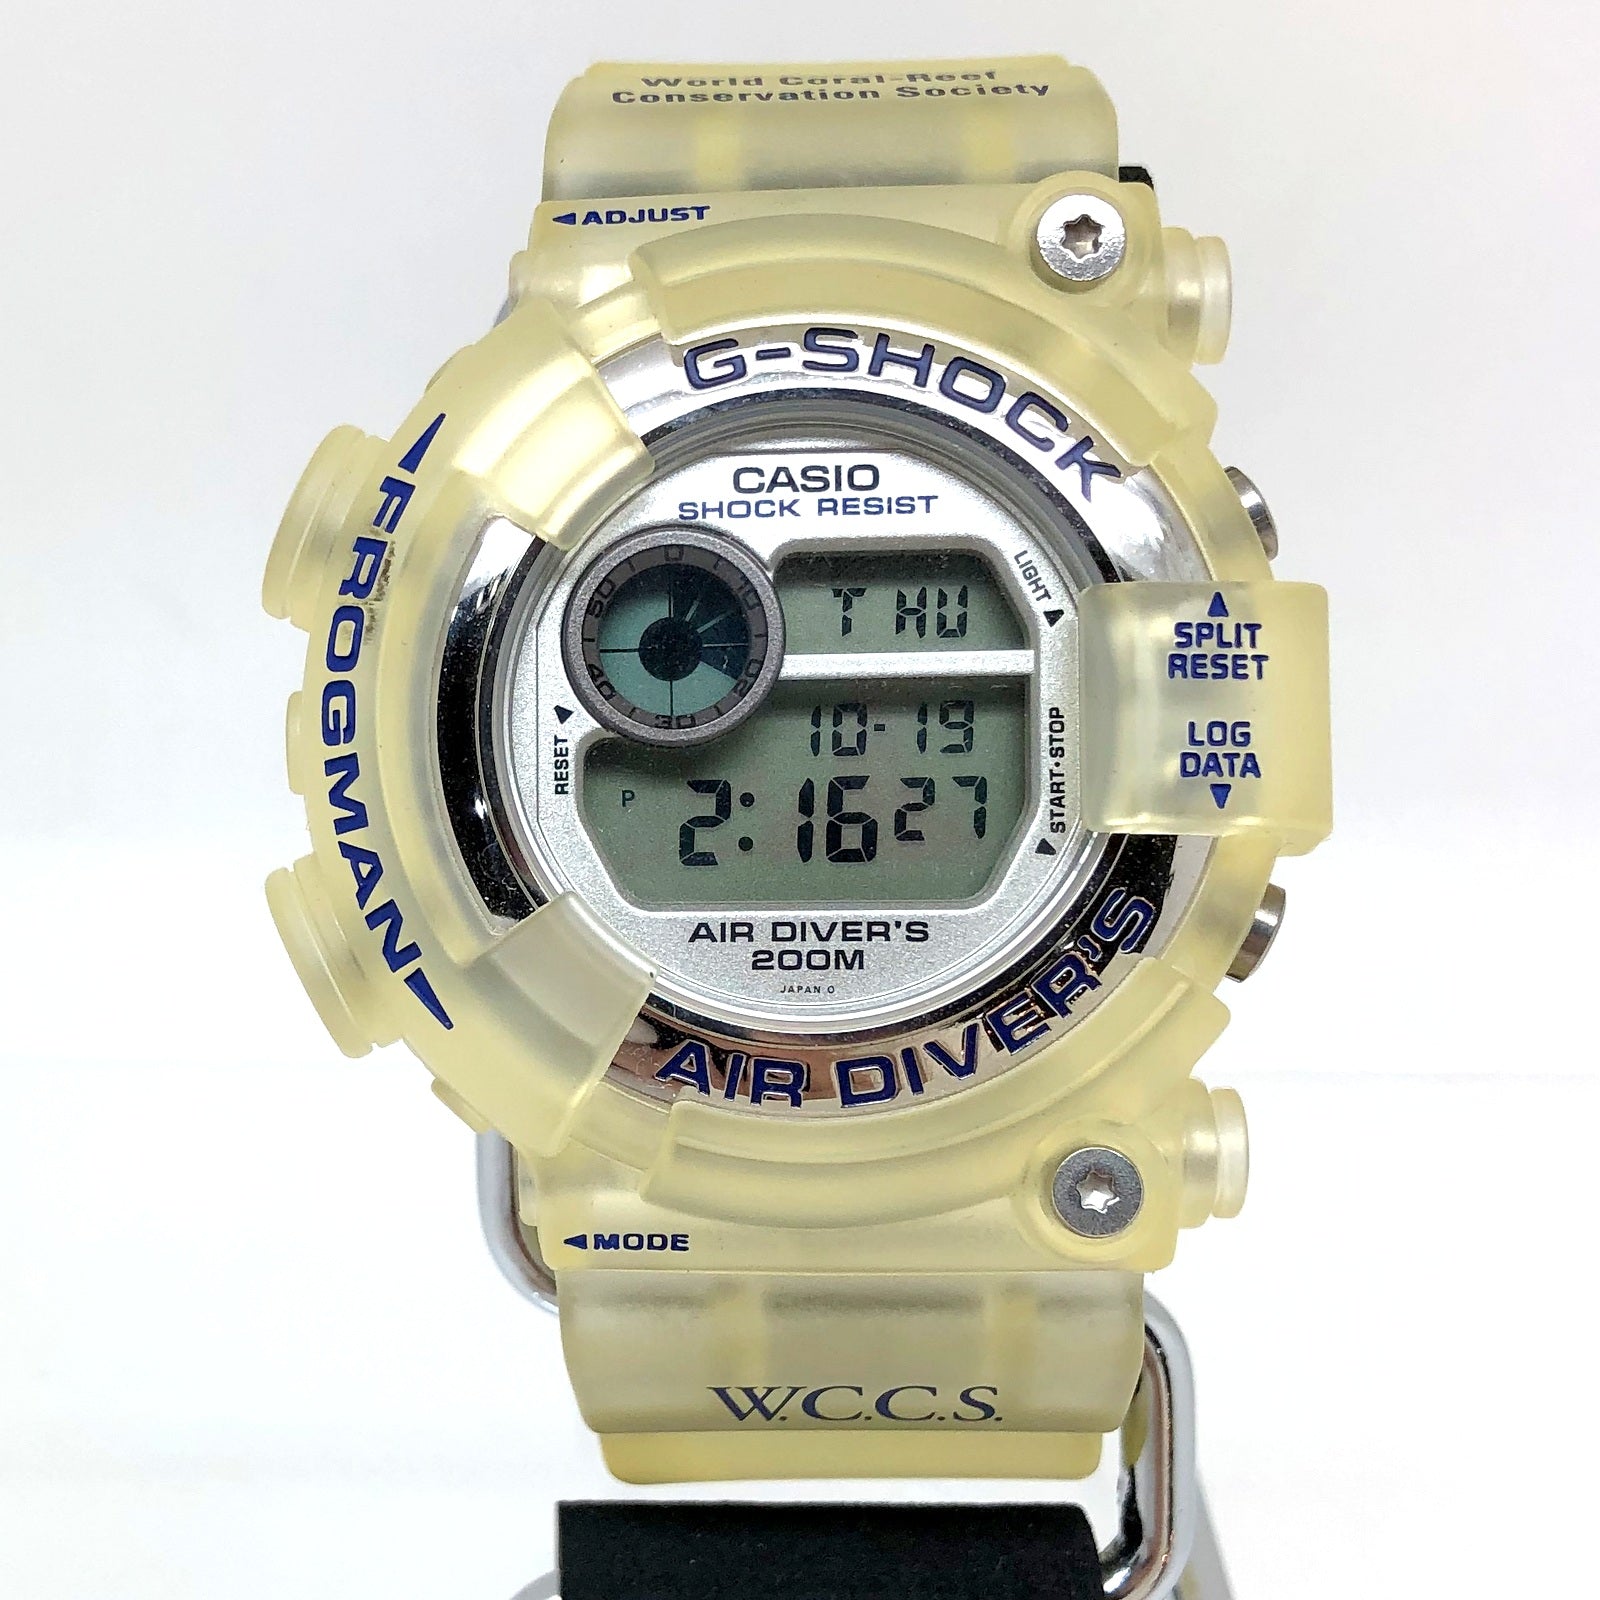 97WCCS白　ペクティニアビガー　DW-8250WC-7AT FROGMAN時計